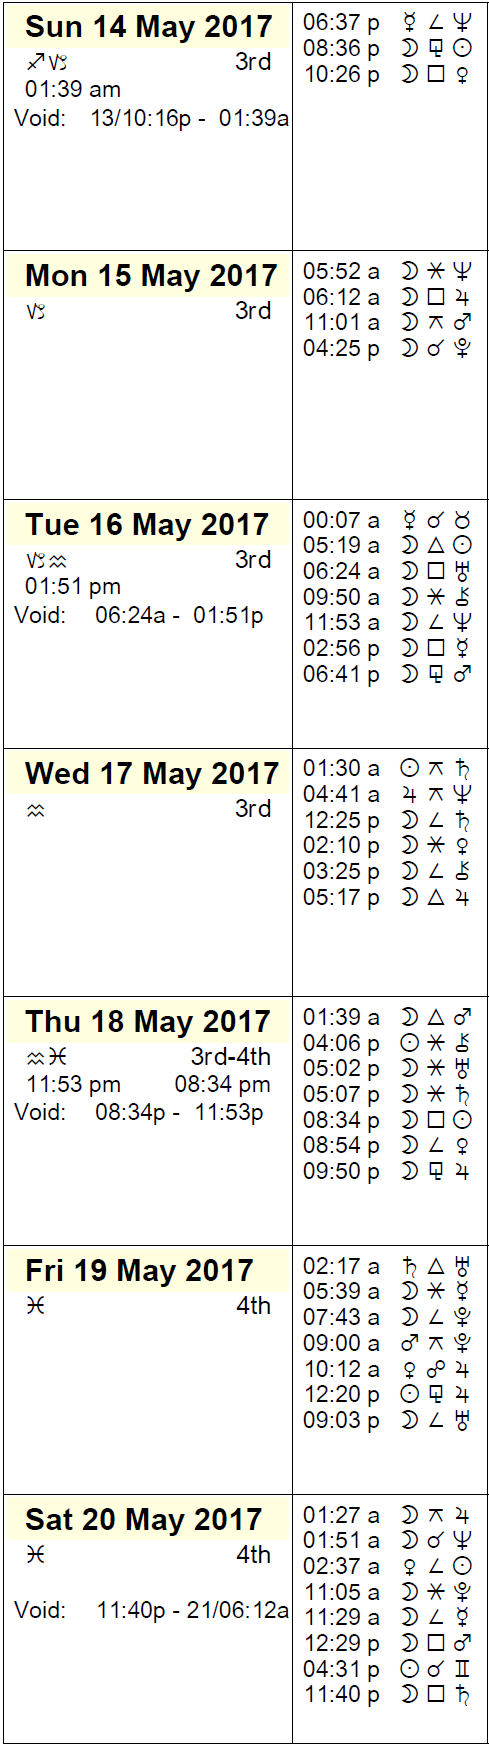 This Week in Astrology Calendar - May 14 to 20, 2017